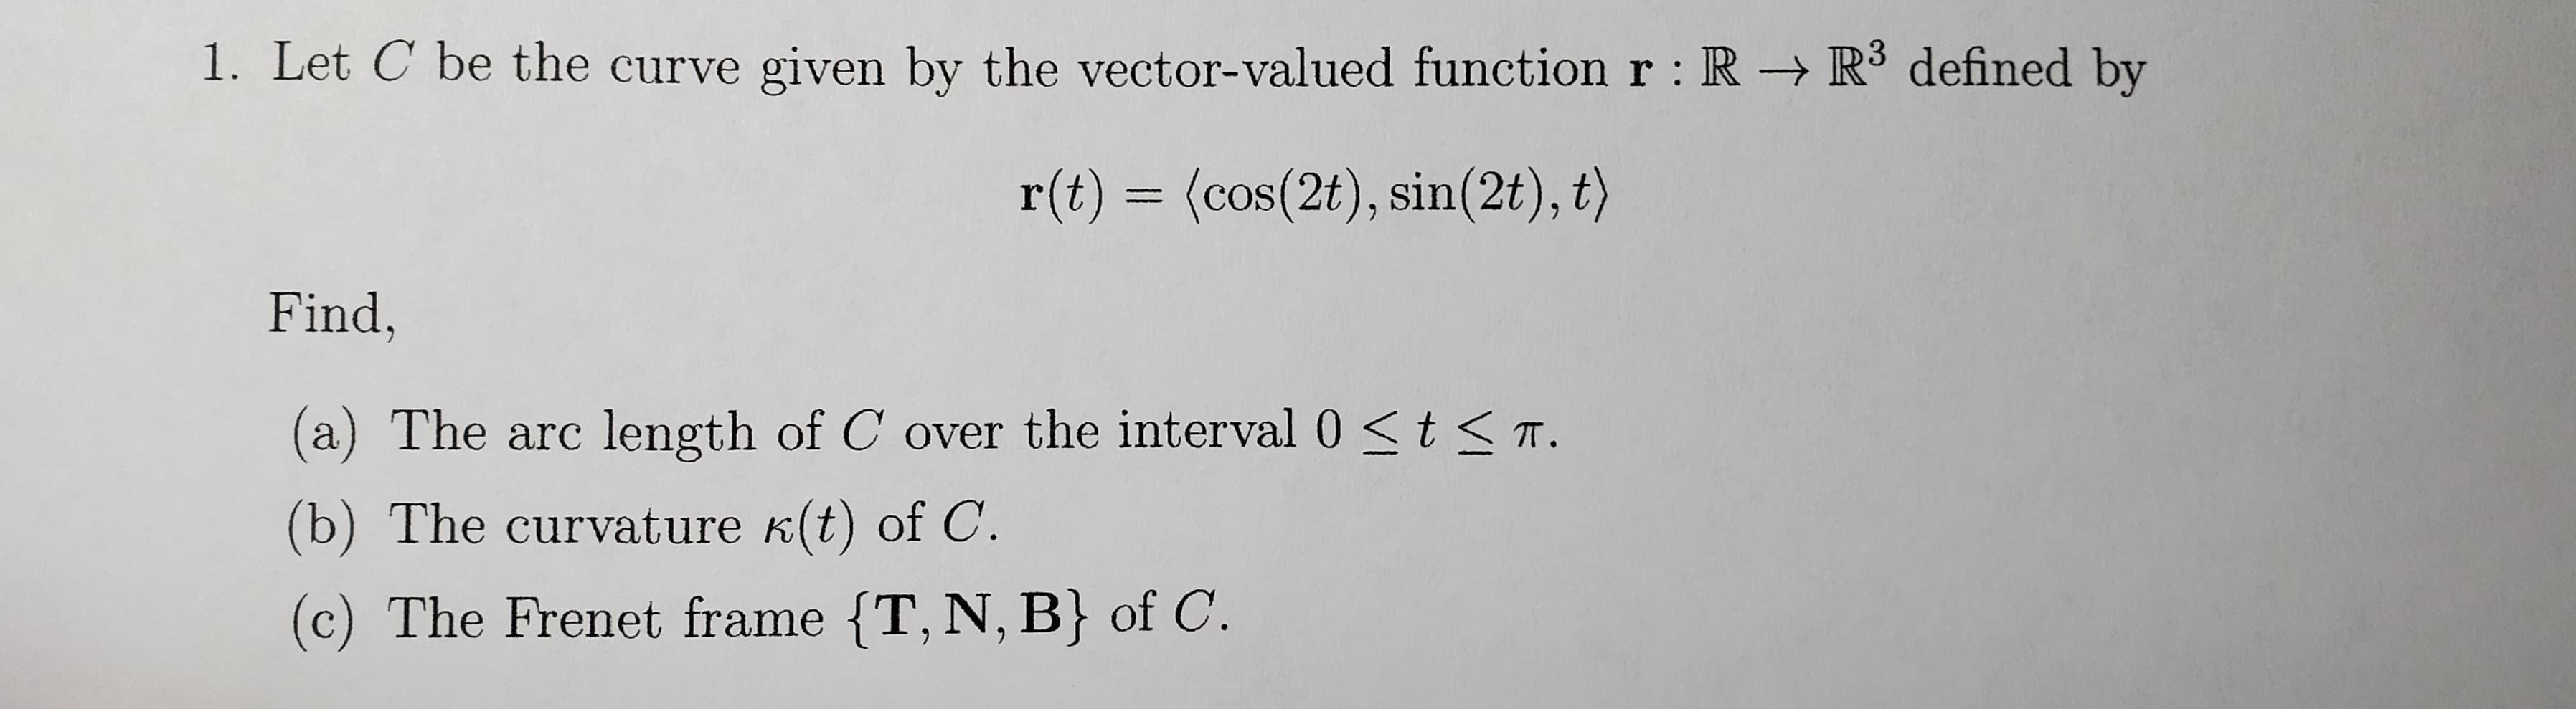 1. Let C be the curve given by the vector-valued function r : R R³ defined by
r(t) = (cos(2t), sin(2t), t)
Find,
(a) The arc length of C over the interval 0 <t < T.
(b) The curvature k(t) of C.
(c) The Frenet frame {T, N, B} of C.
